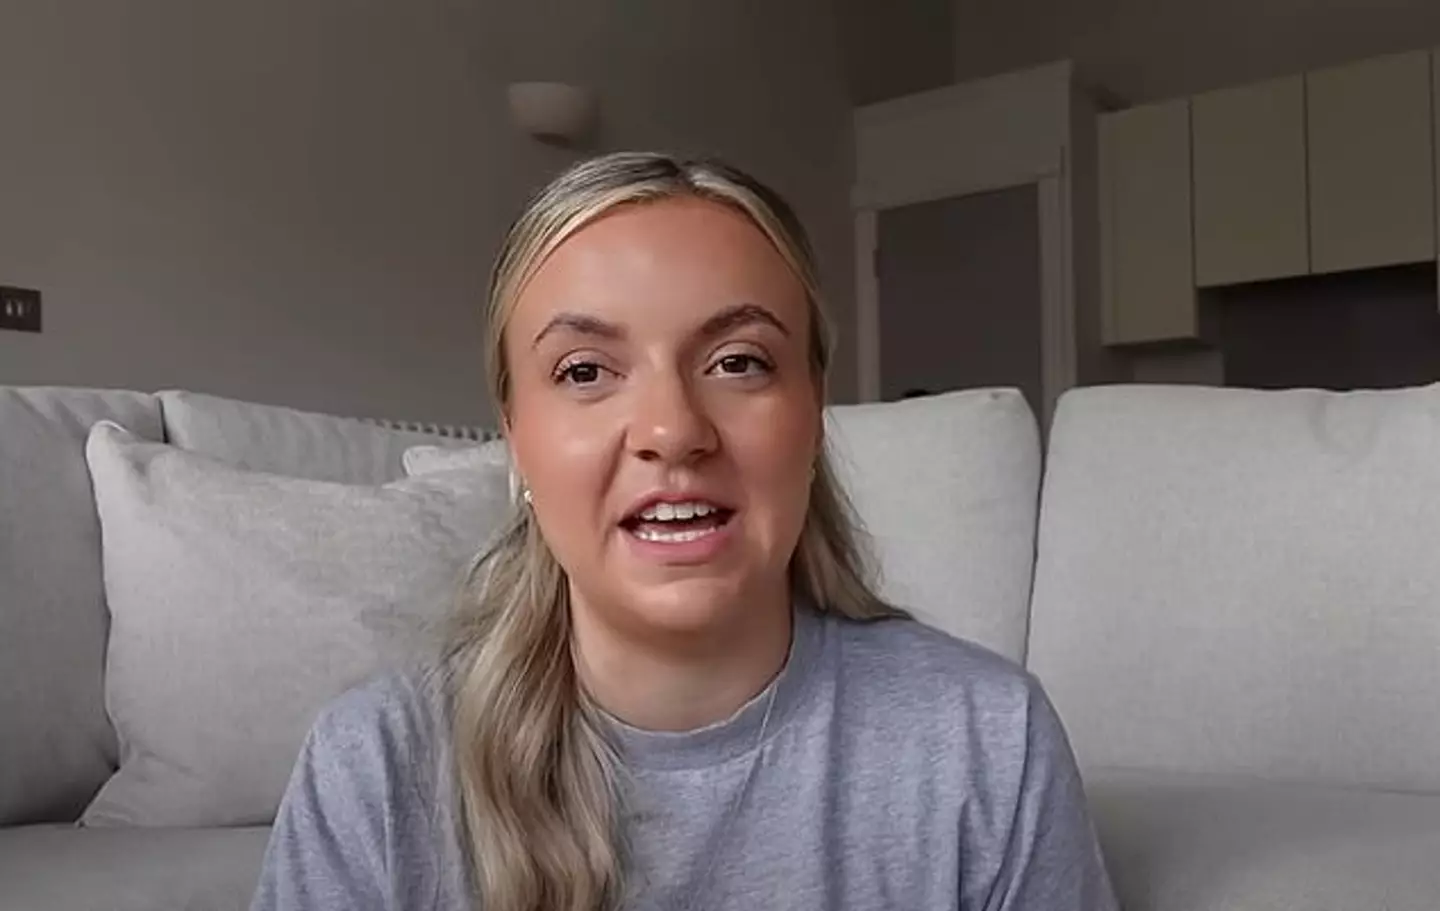 Molly-Mae Hague's sister Zoe says being a full-time influencer 'isn't fulfilling'.